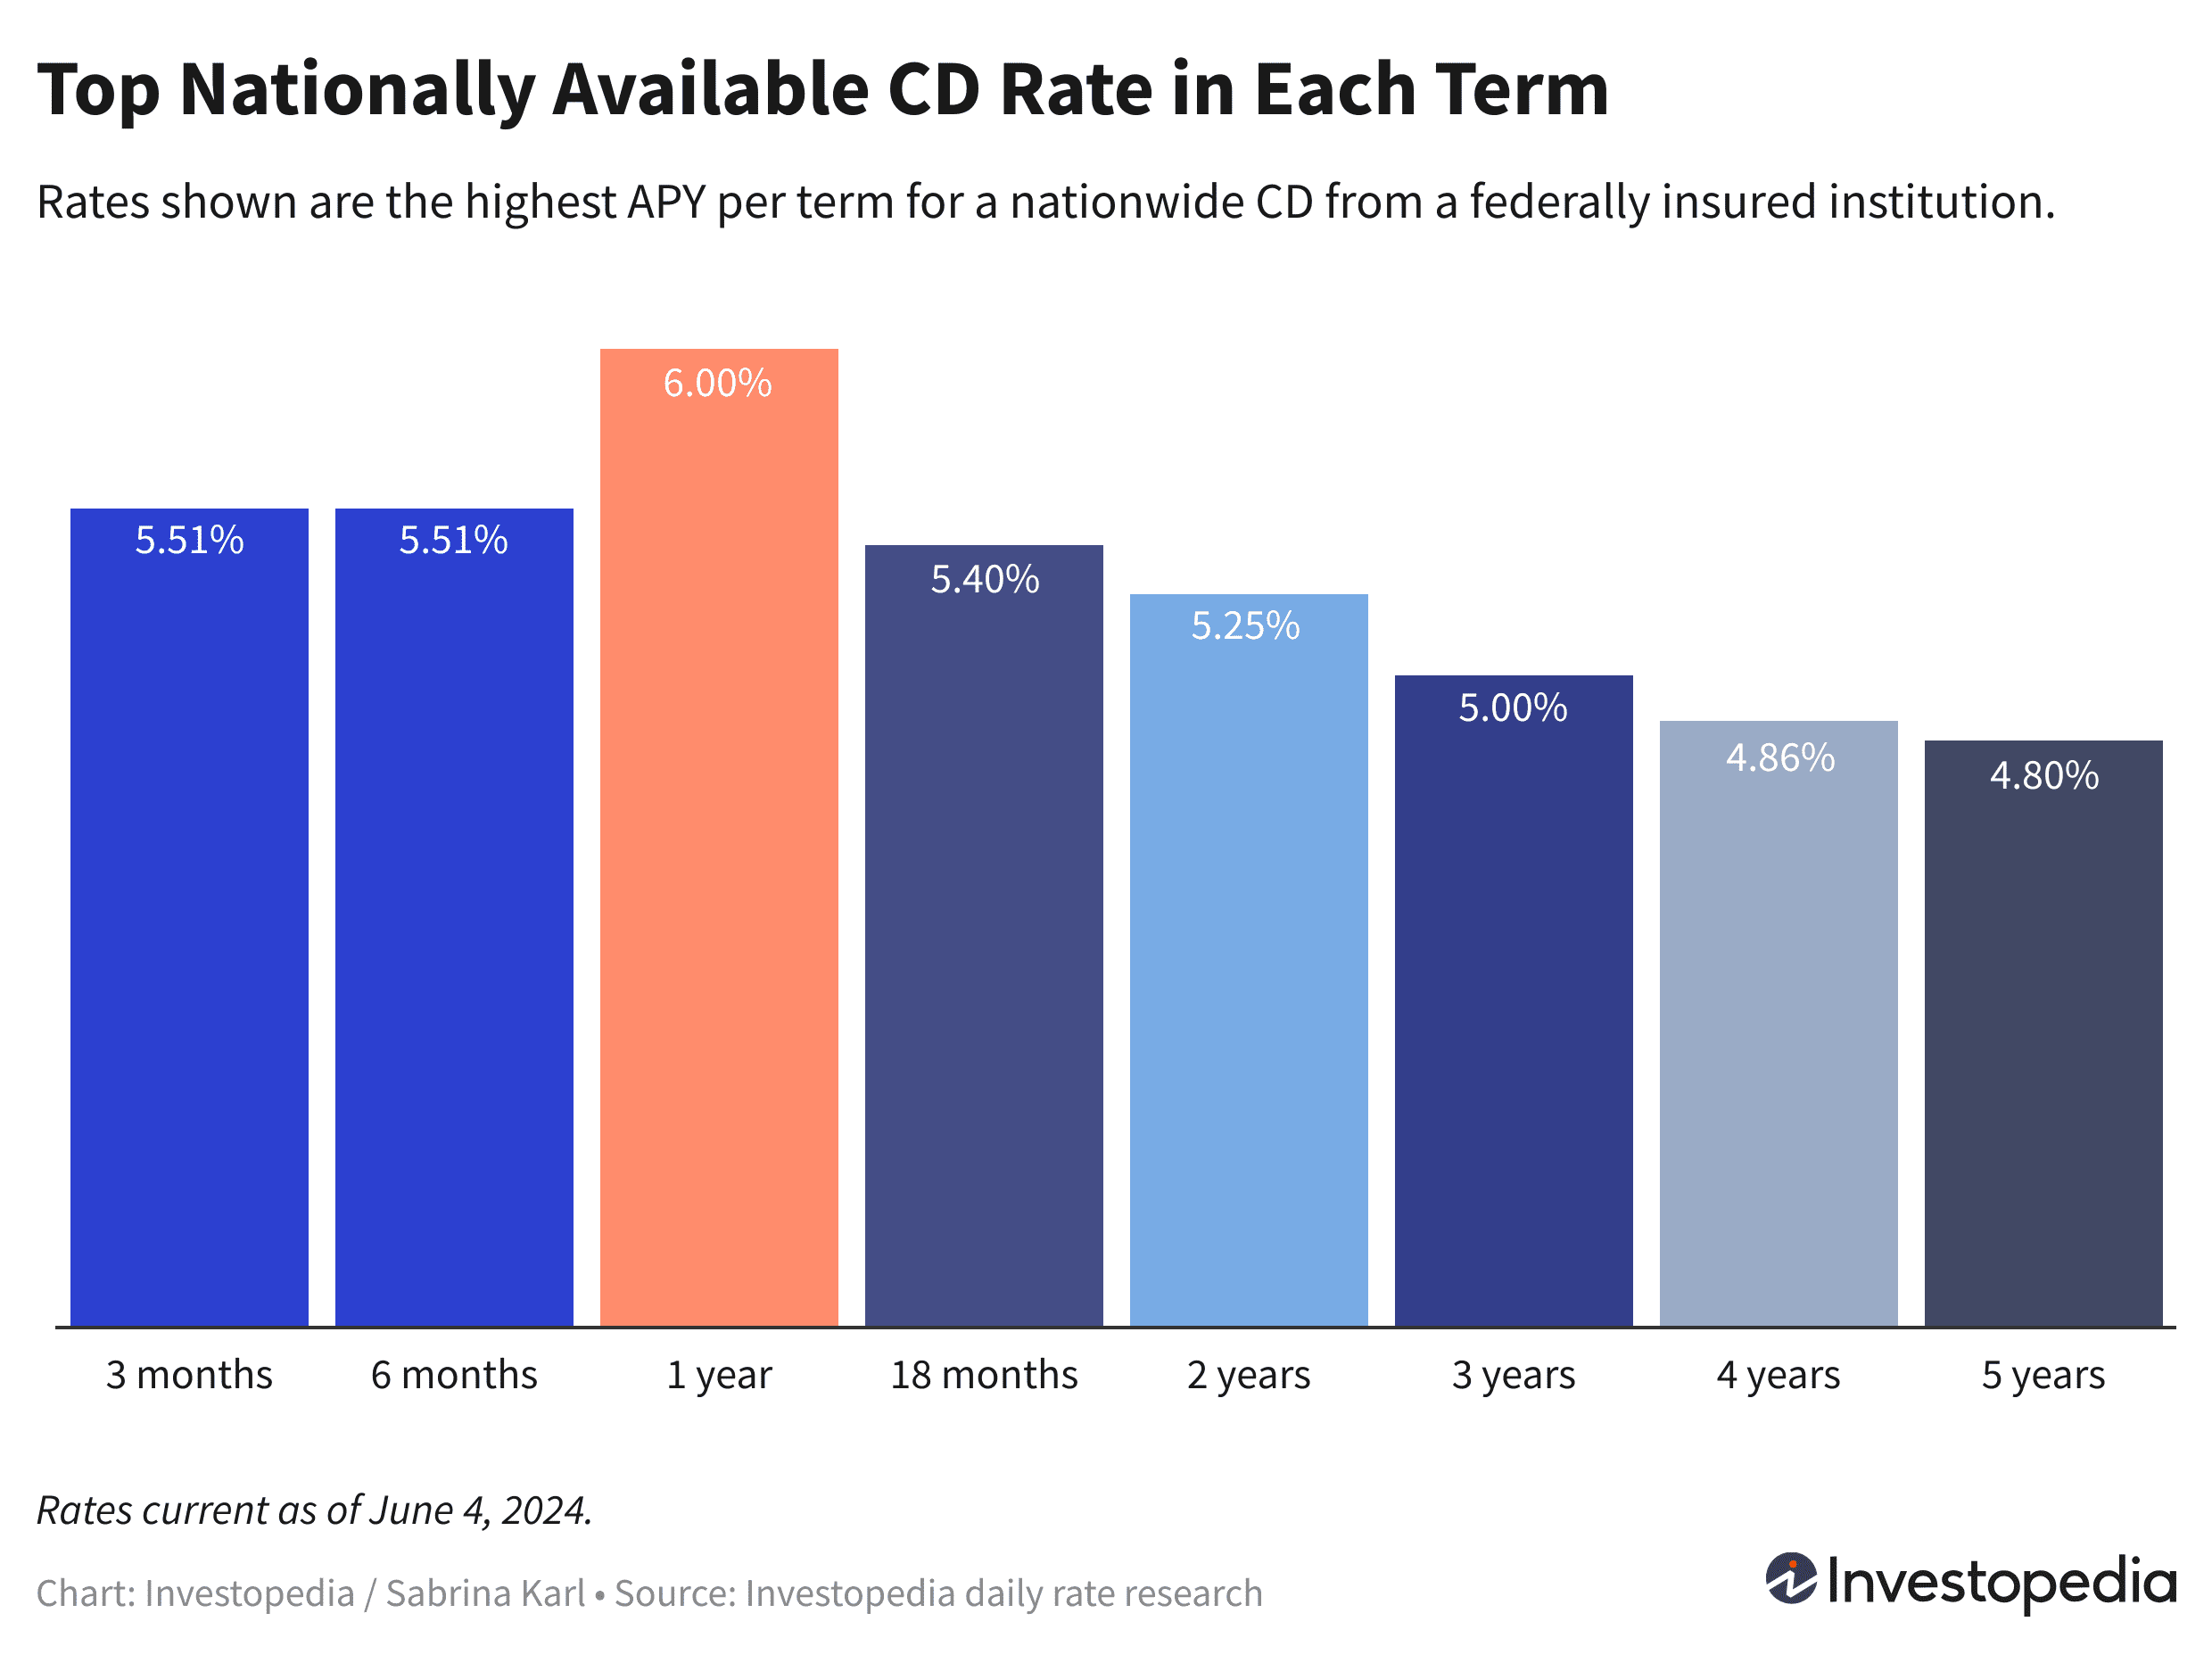 Top nationwide CD rate in each term, ranging from 4.80% to 5.51%, current as of June 4, 2024.